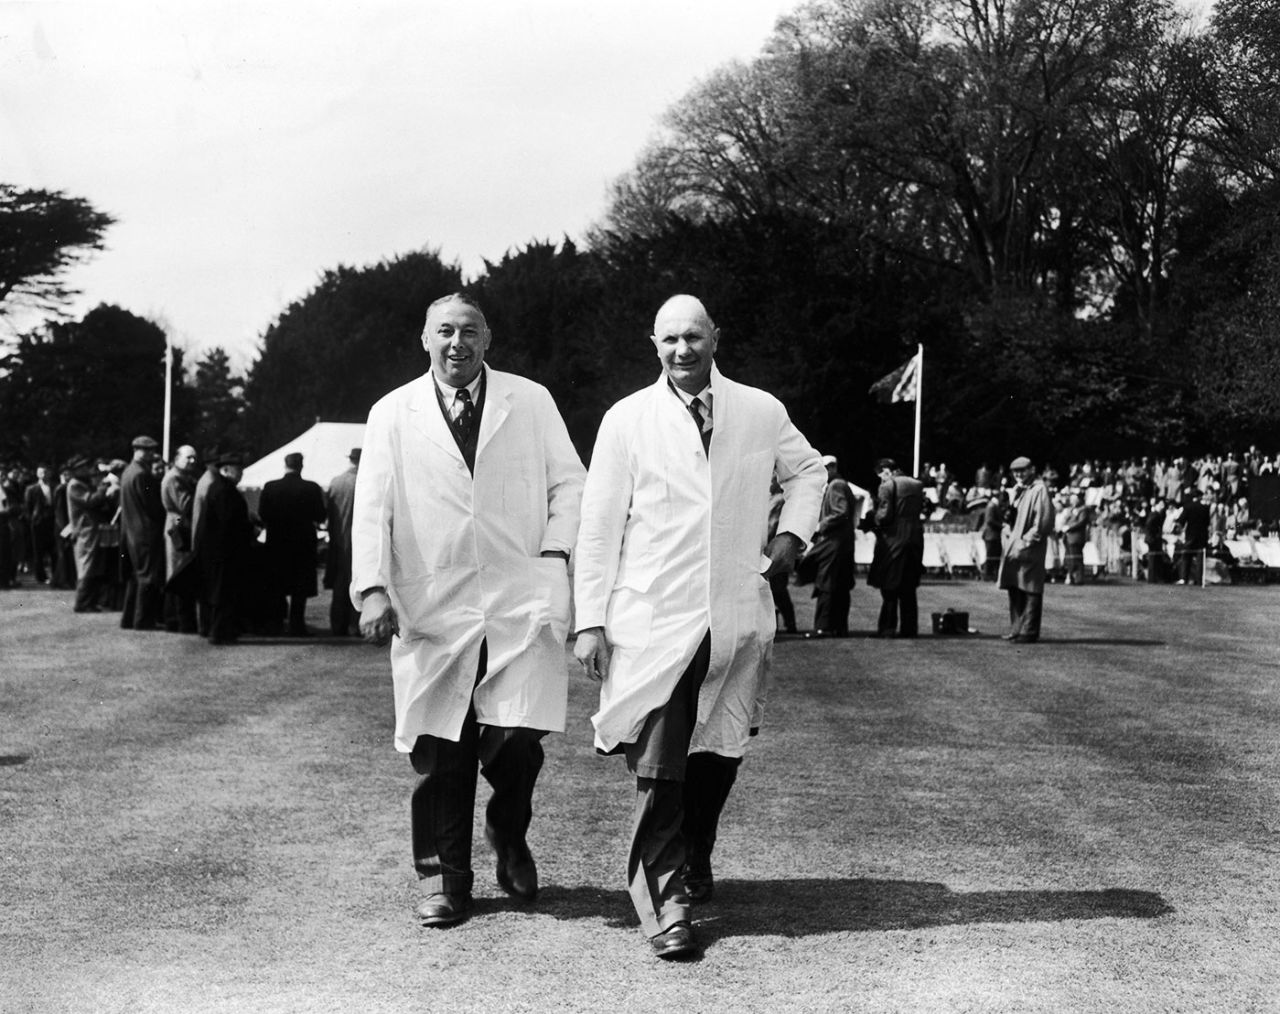 Umpires Maurice Tate and John Langridge (right) walk out for a game in 1956